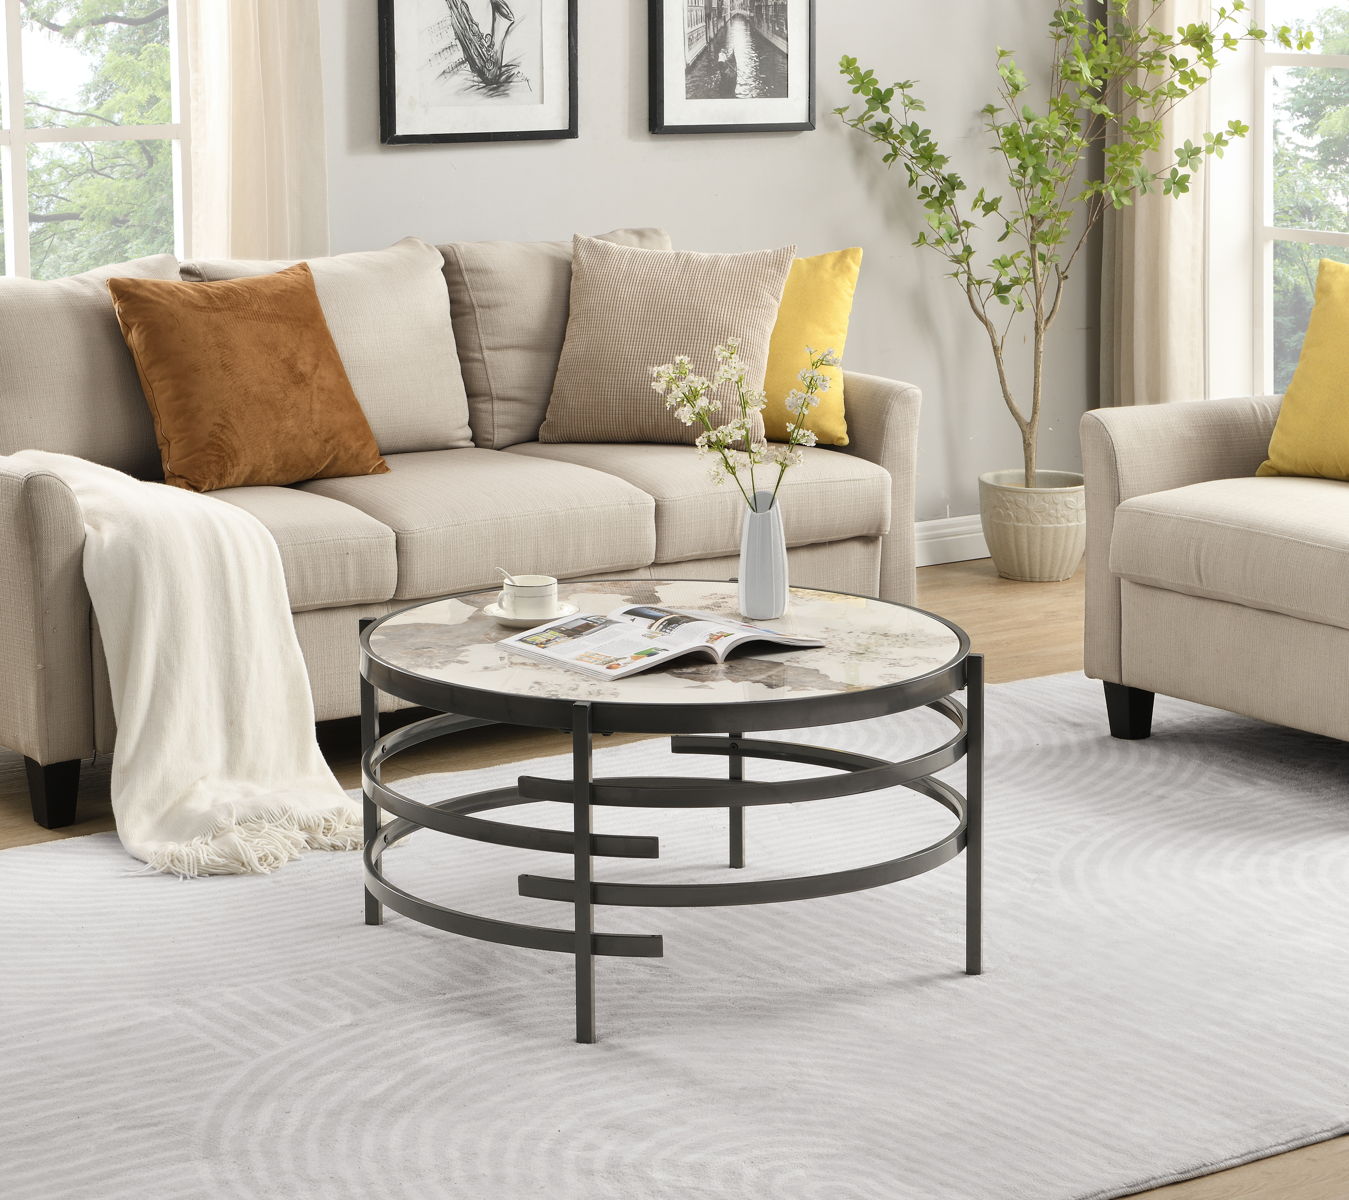 32.48'' Round Coffee Table With Sintered Stone Top&Sturdy Metal Frame, Modern Coffee Table For Living Room - Darker Gray